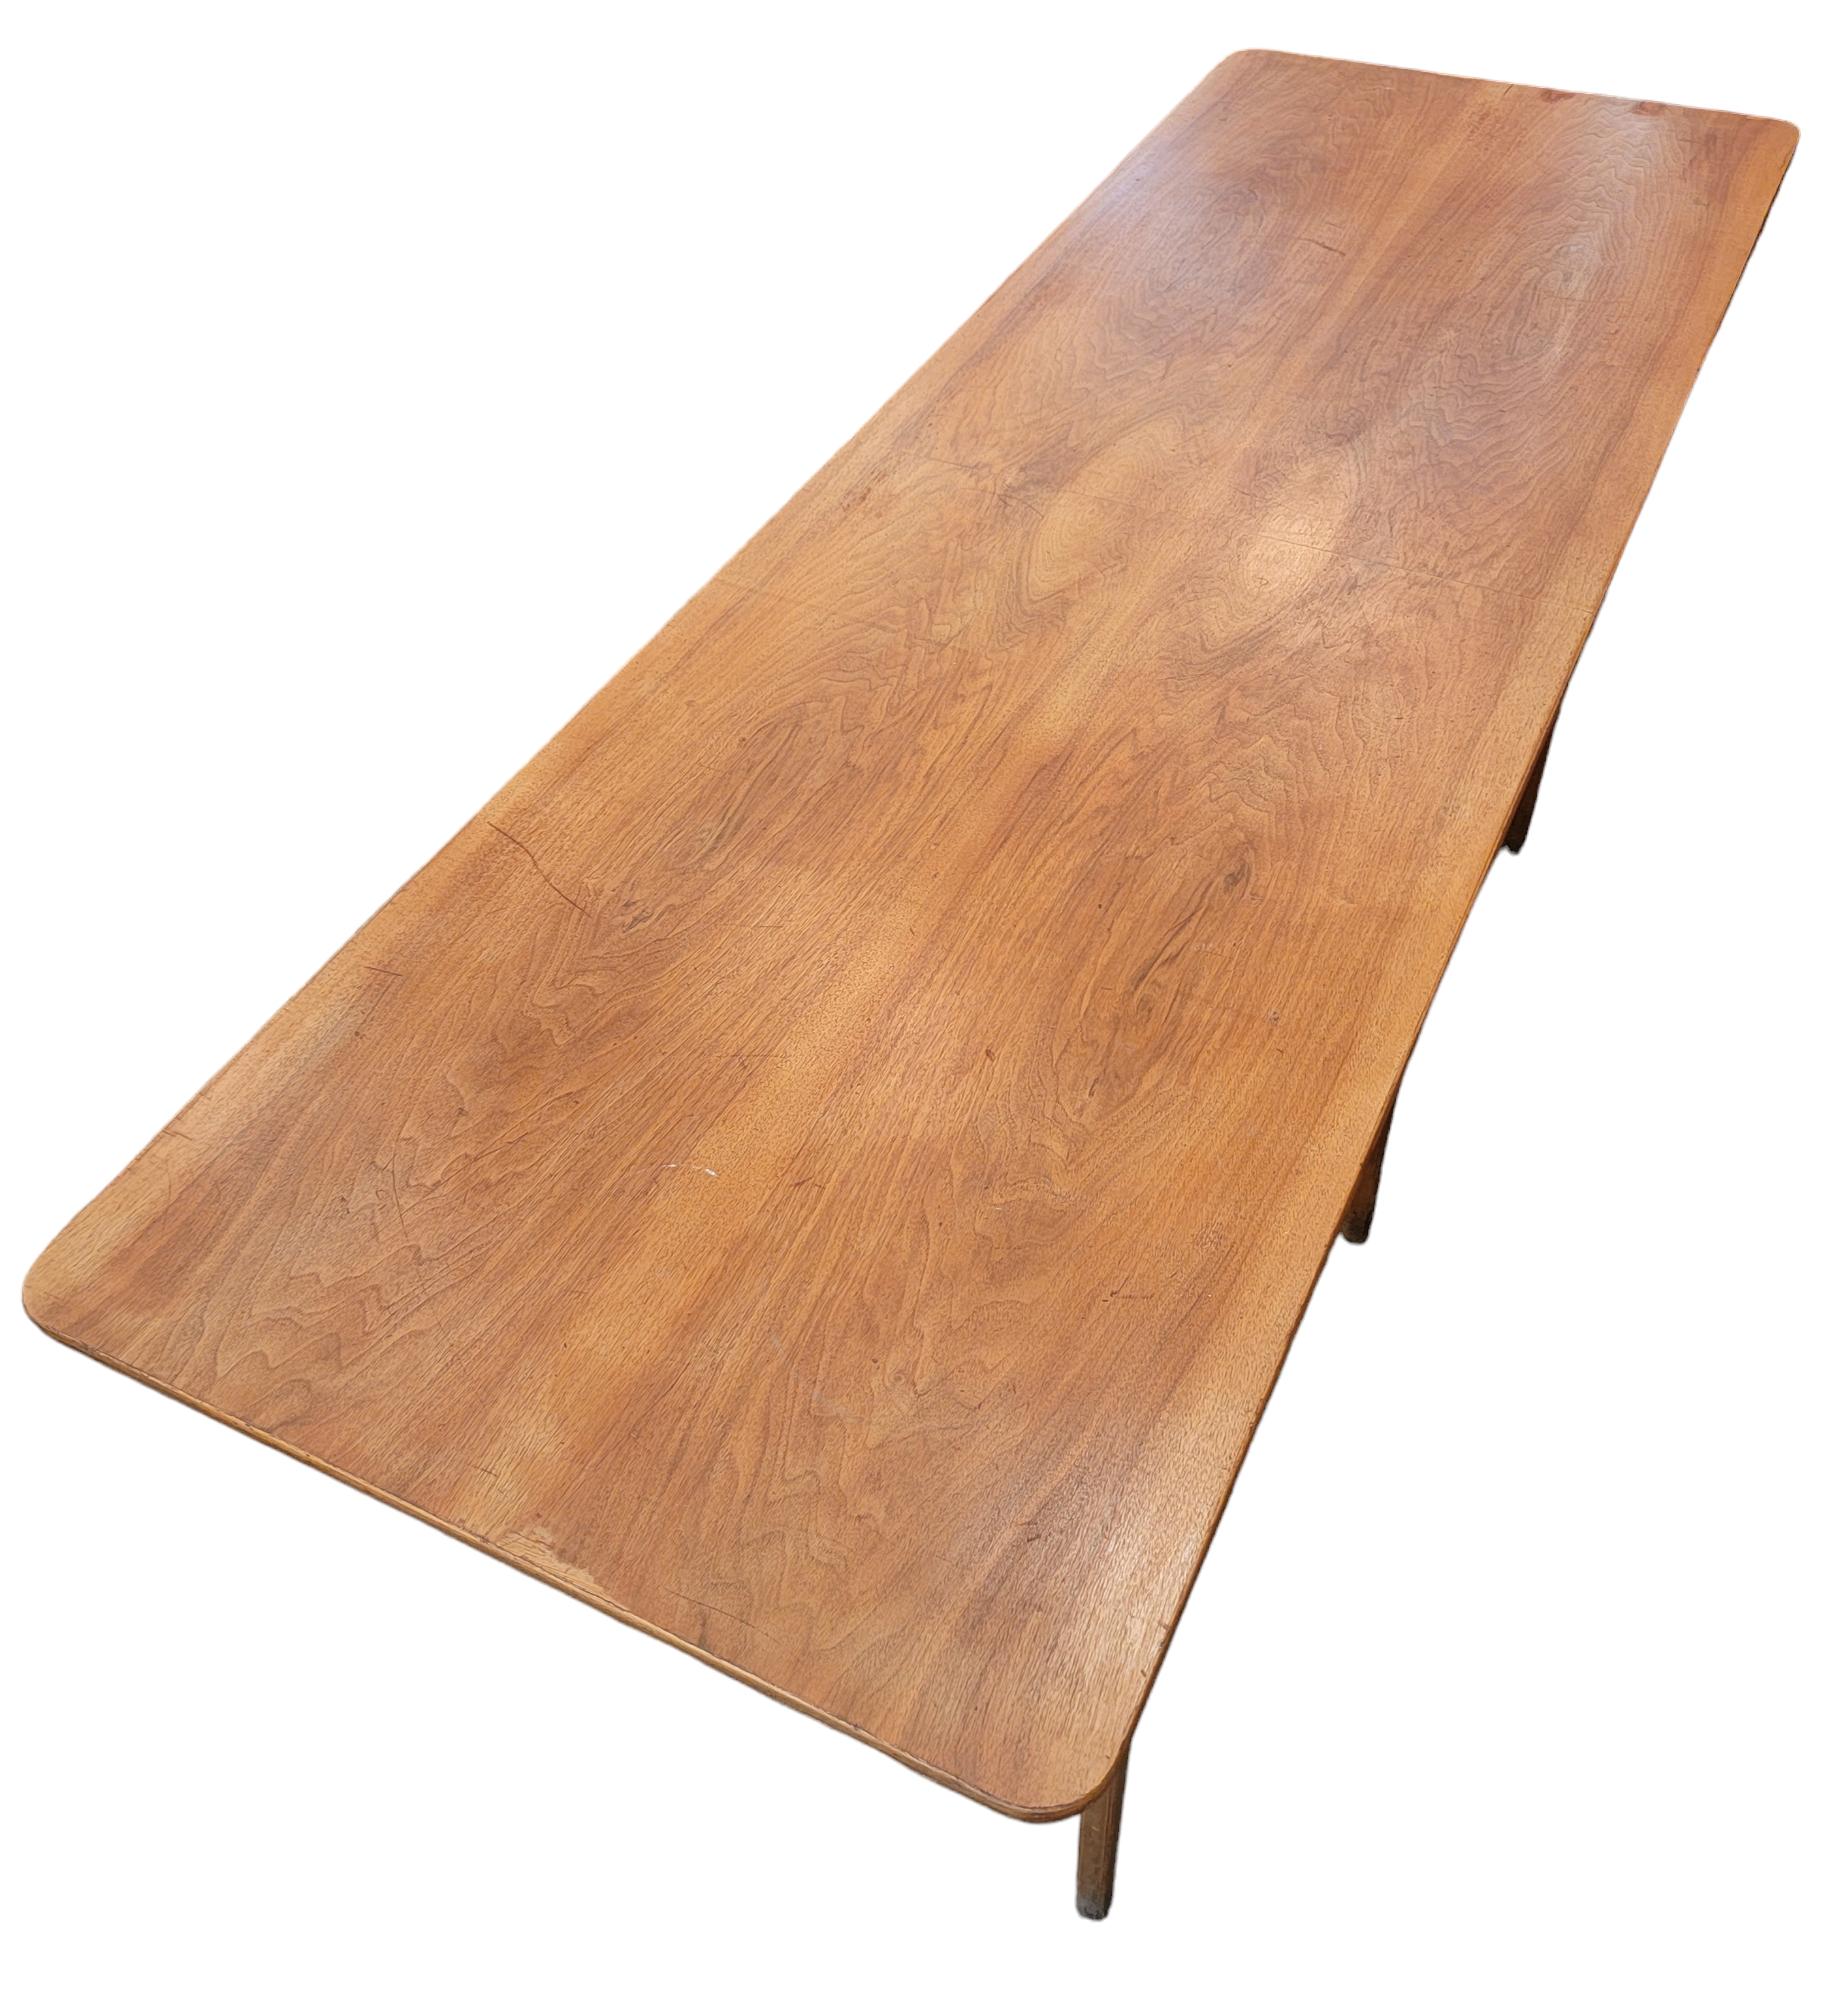 Mid-Century Modern Danish Peter Hvidt Teak Library Table or Coffee Table For Sale